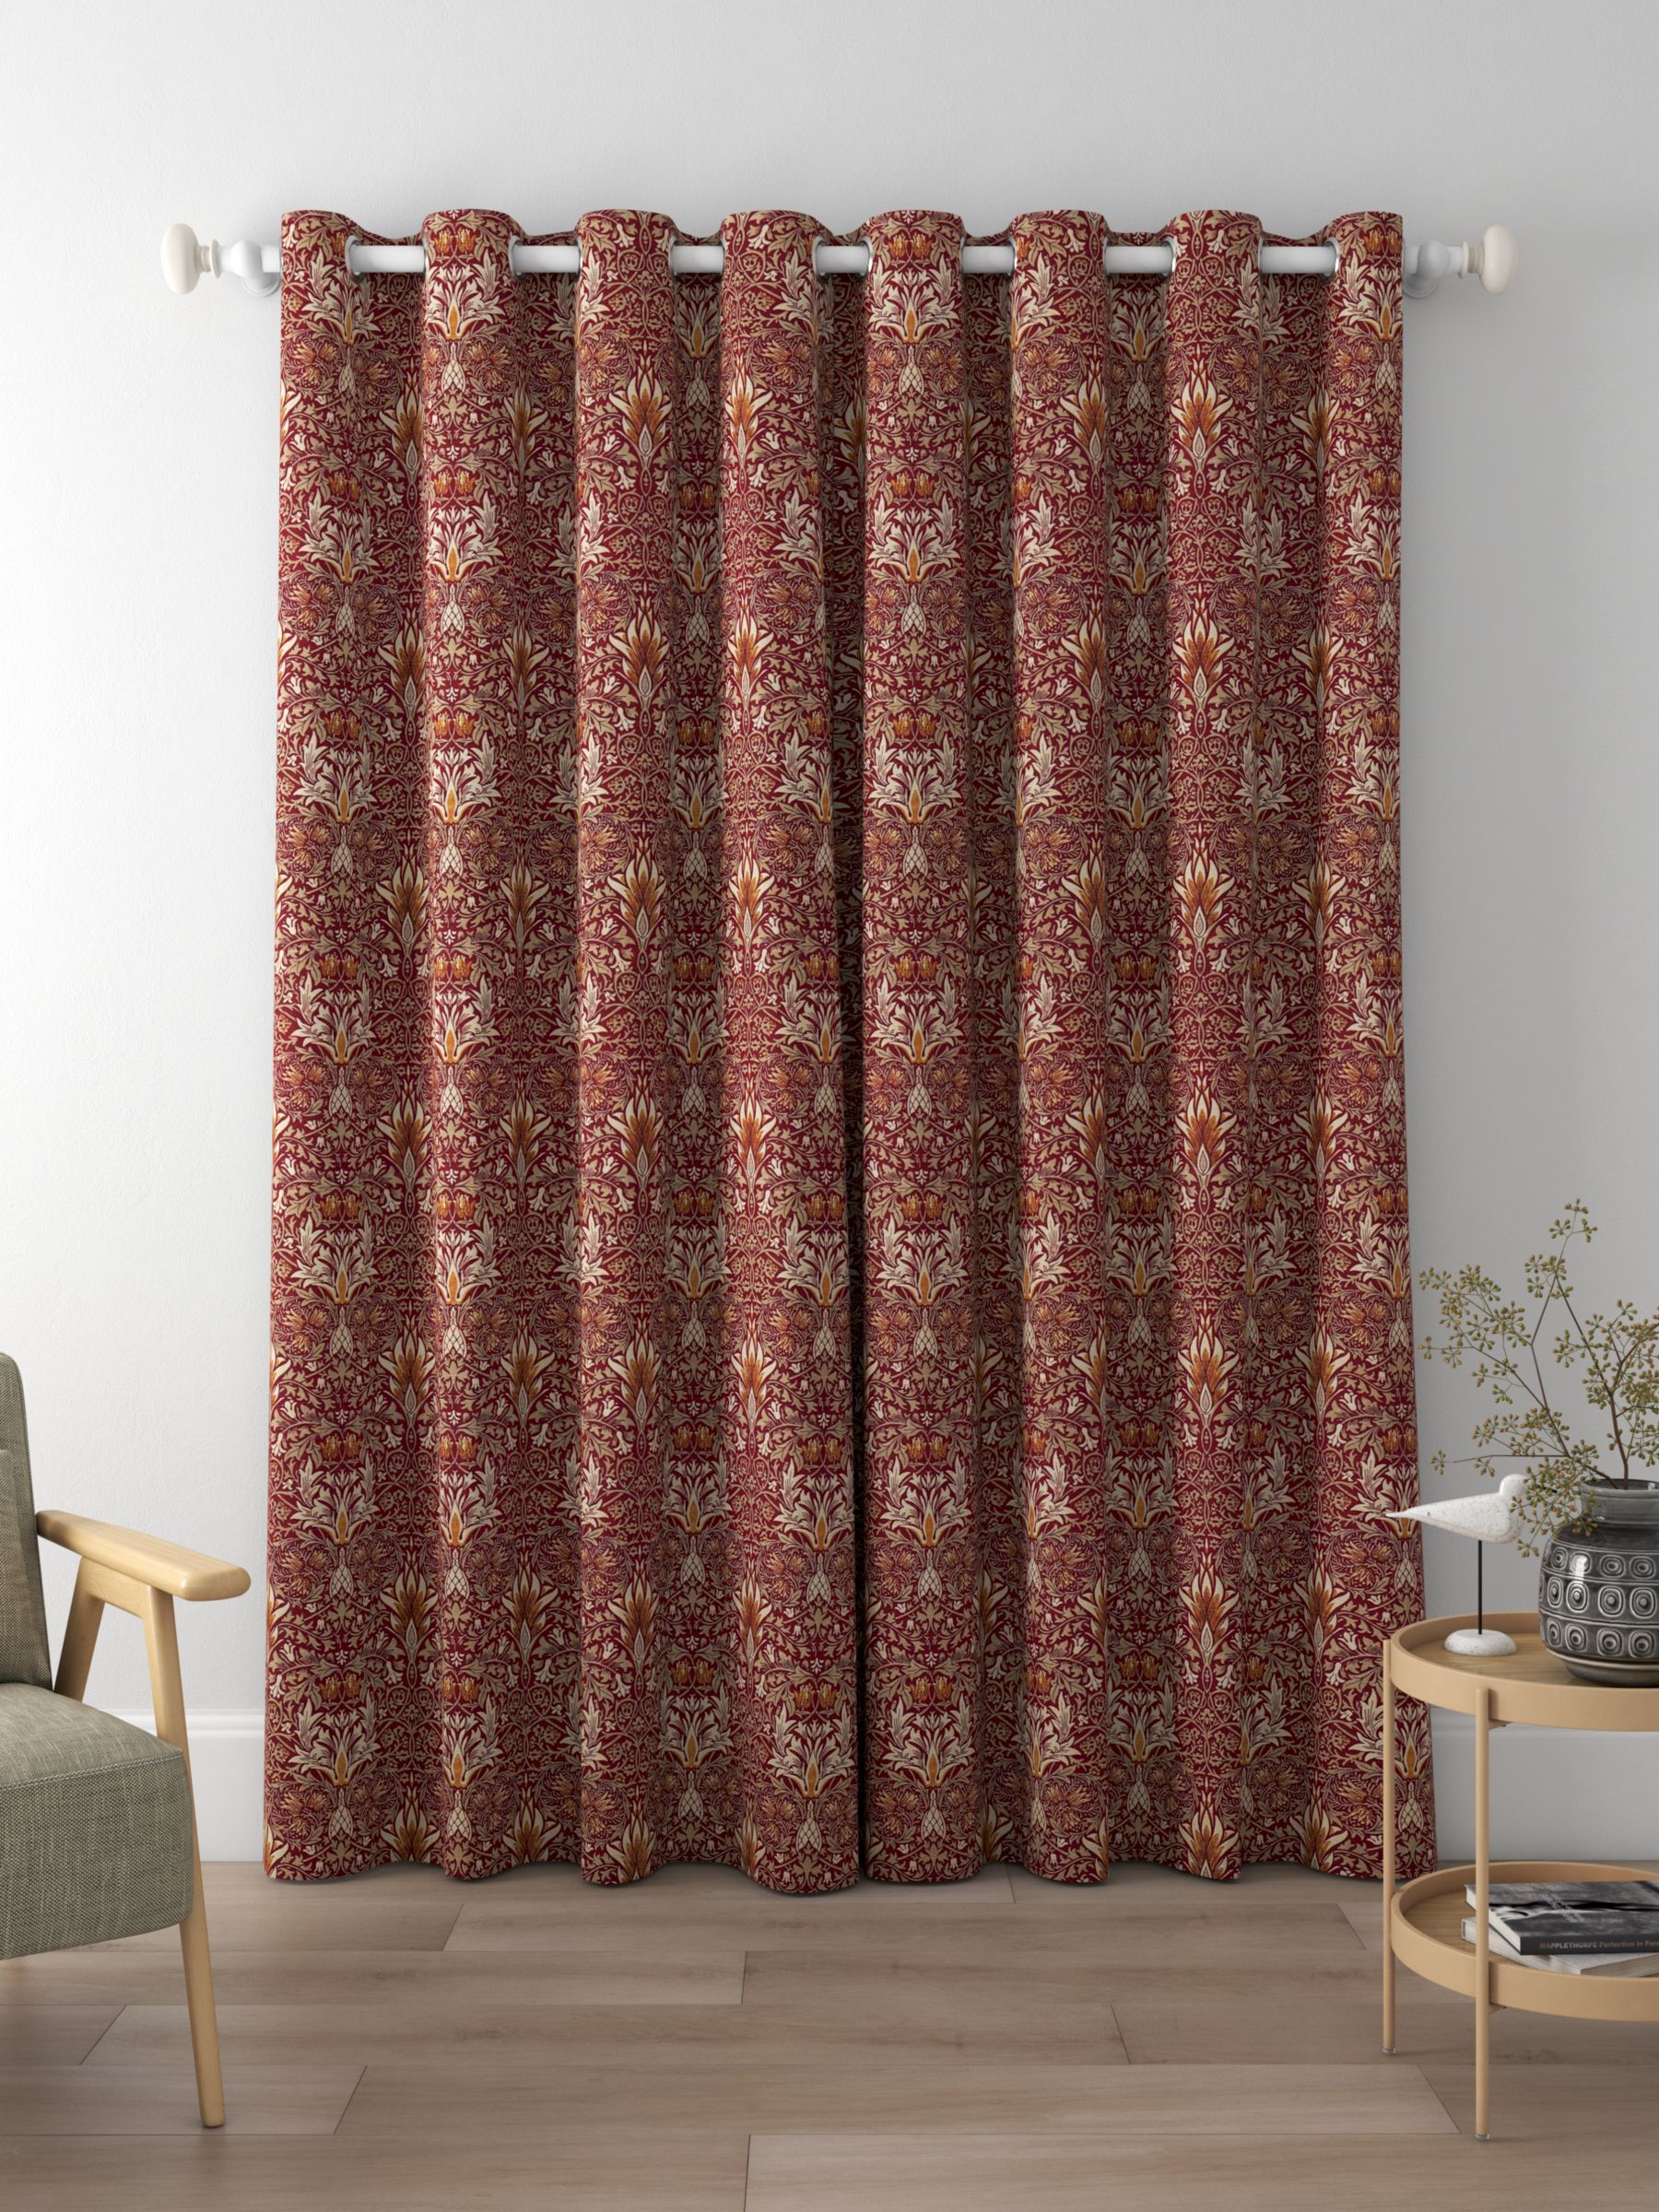 Morris & Co. Snakeshead Made to Measure Curtains, Claret/Gold